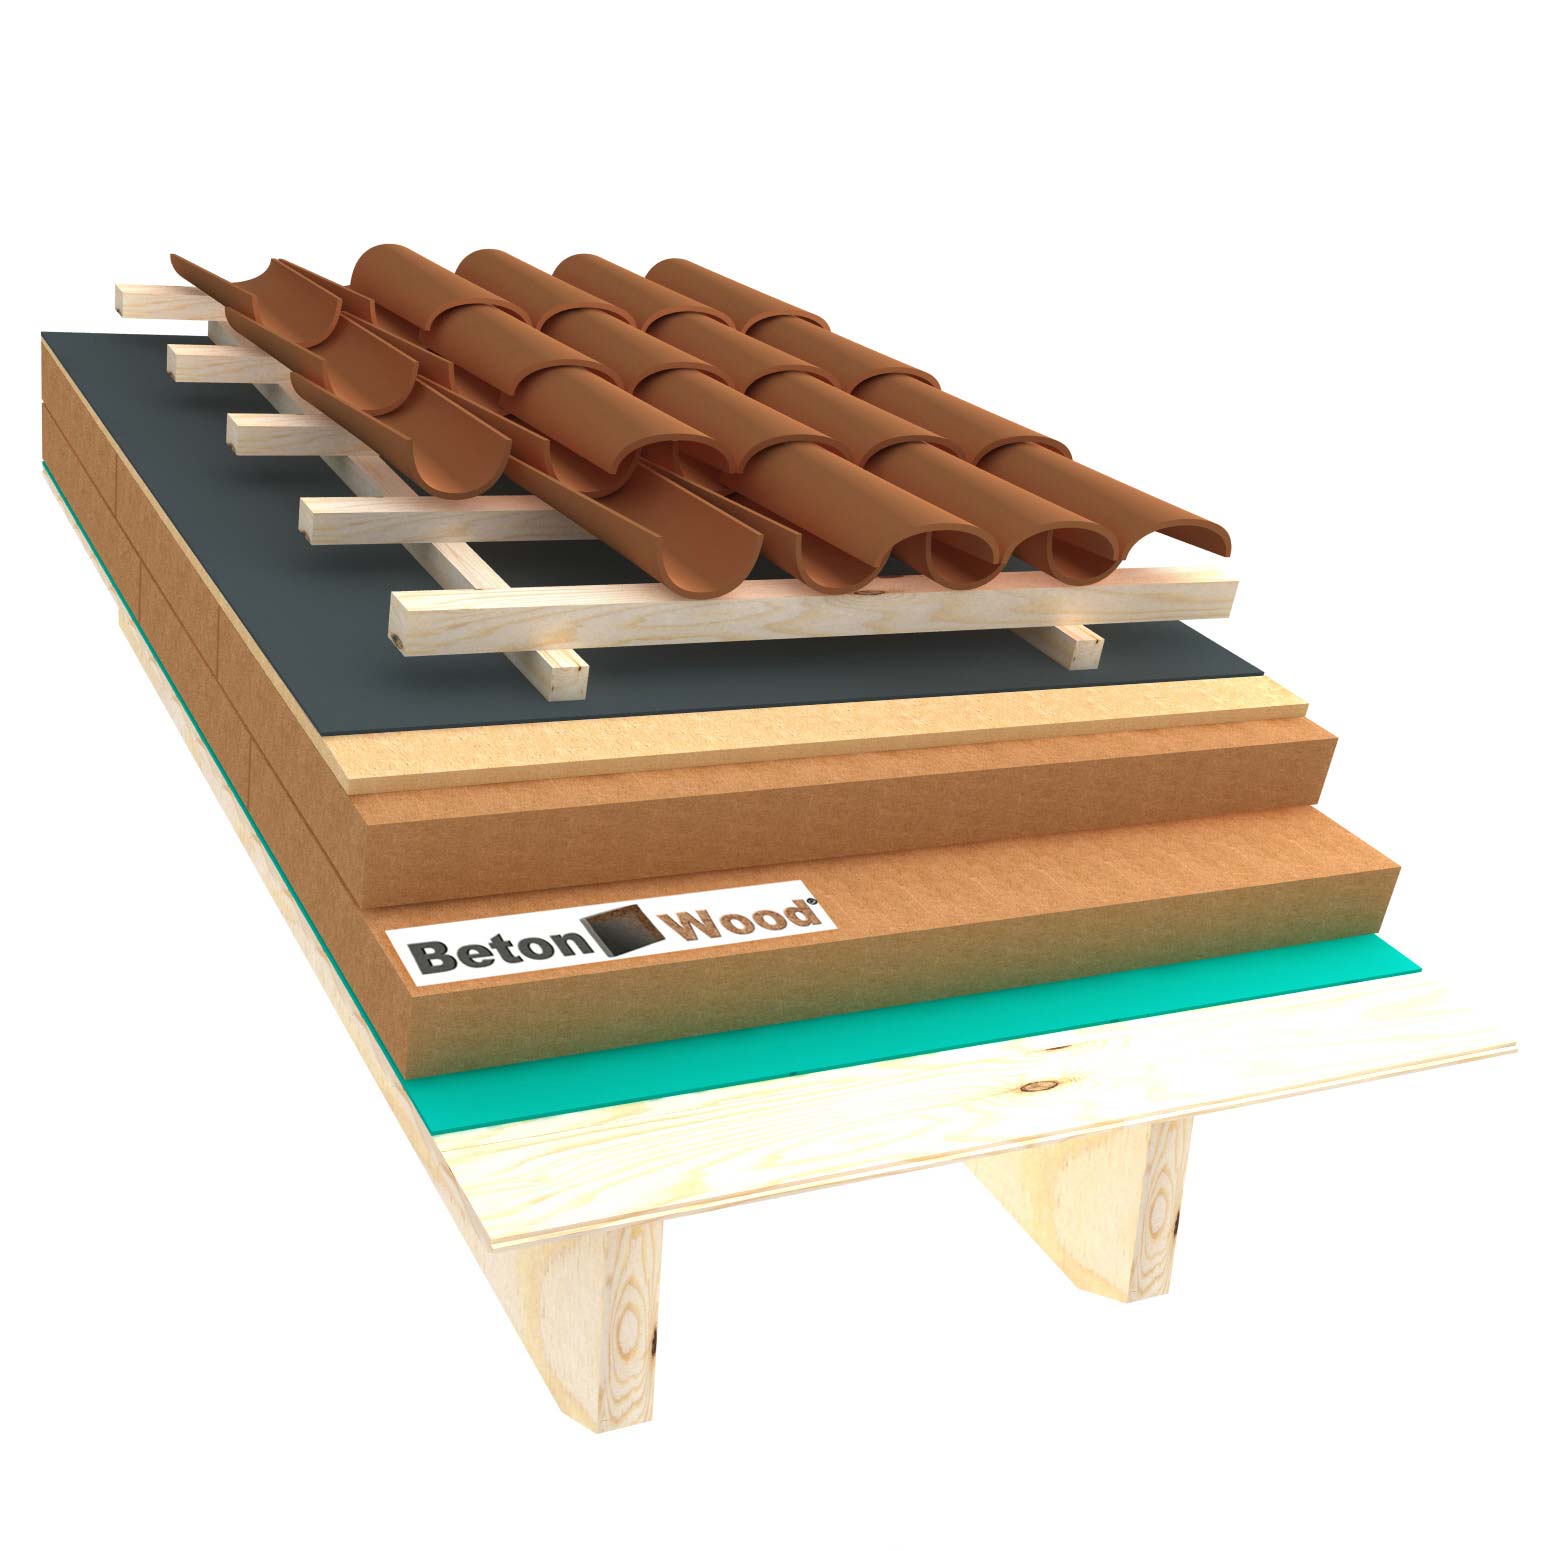 Ventilated roof with fiber wood Isorel and Special dry on matchboarding